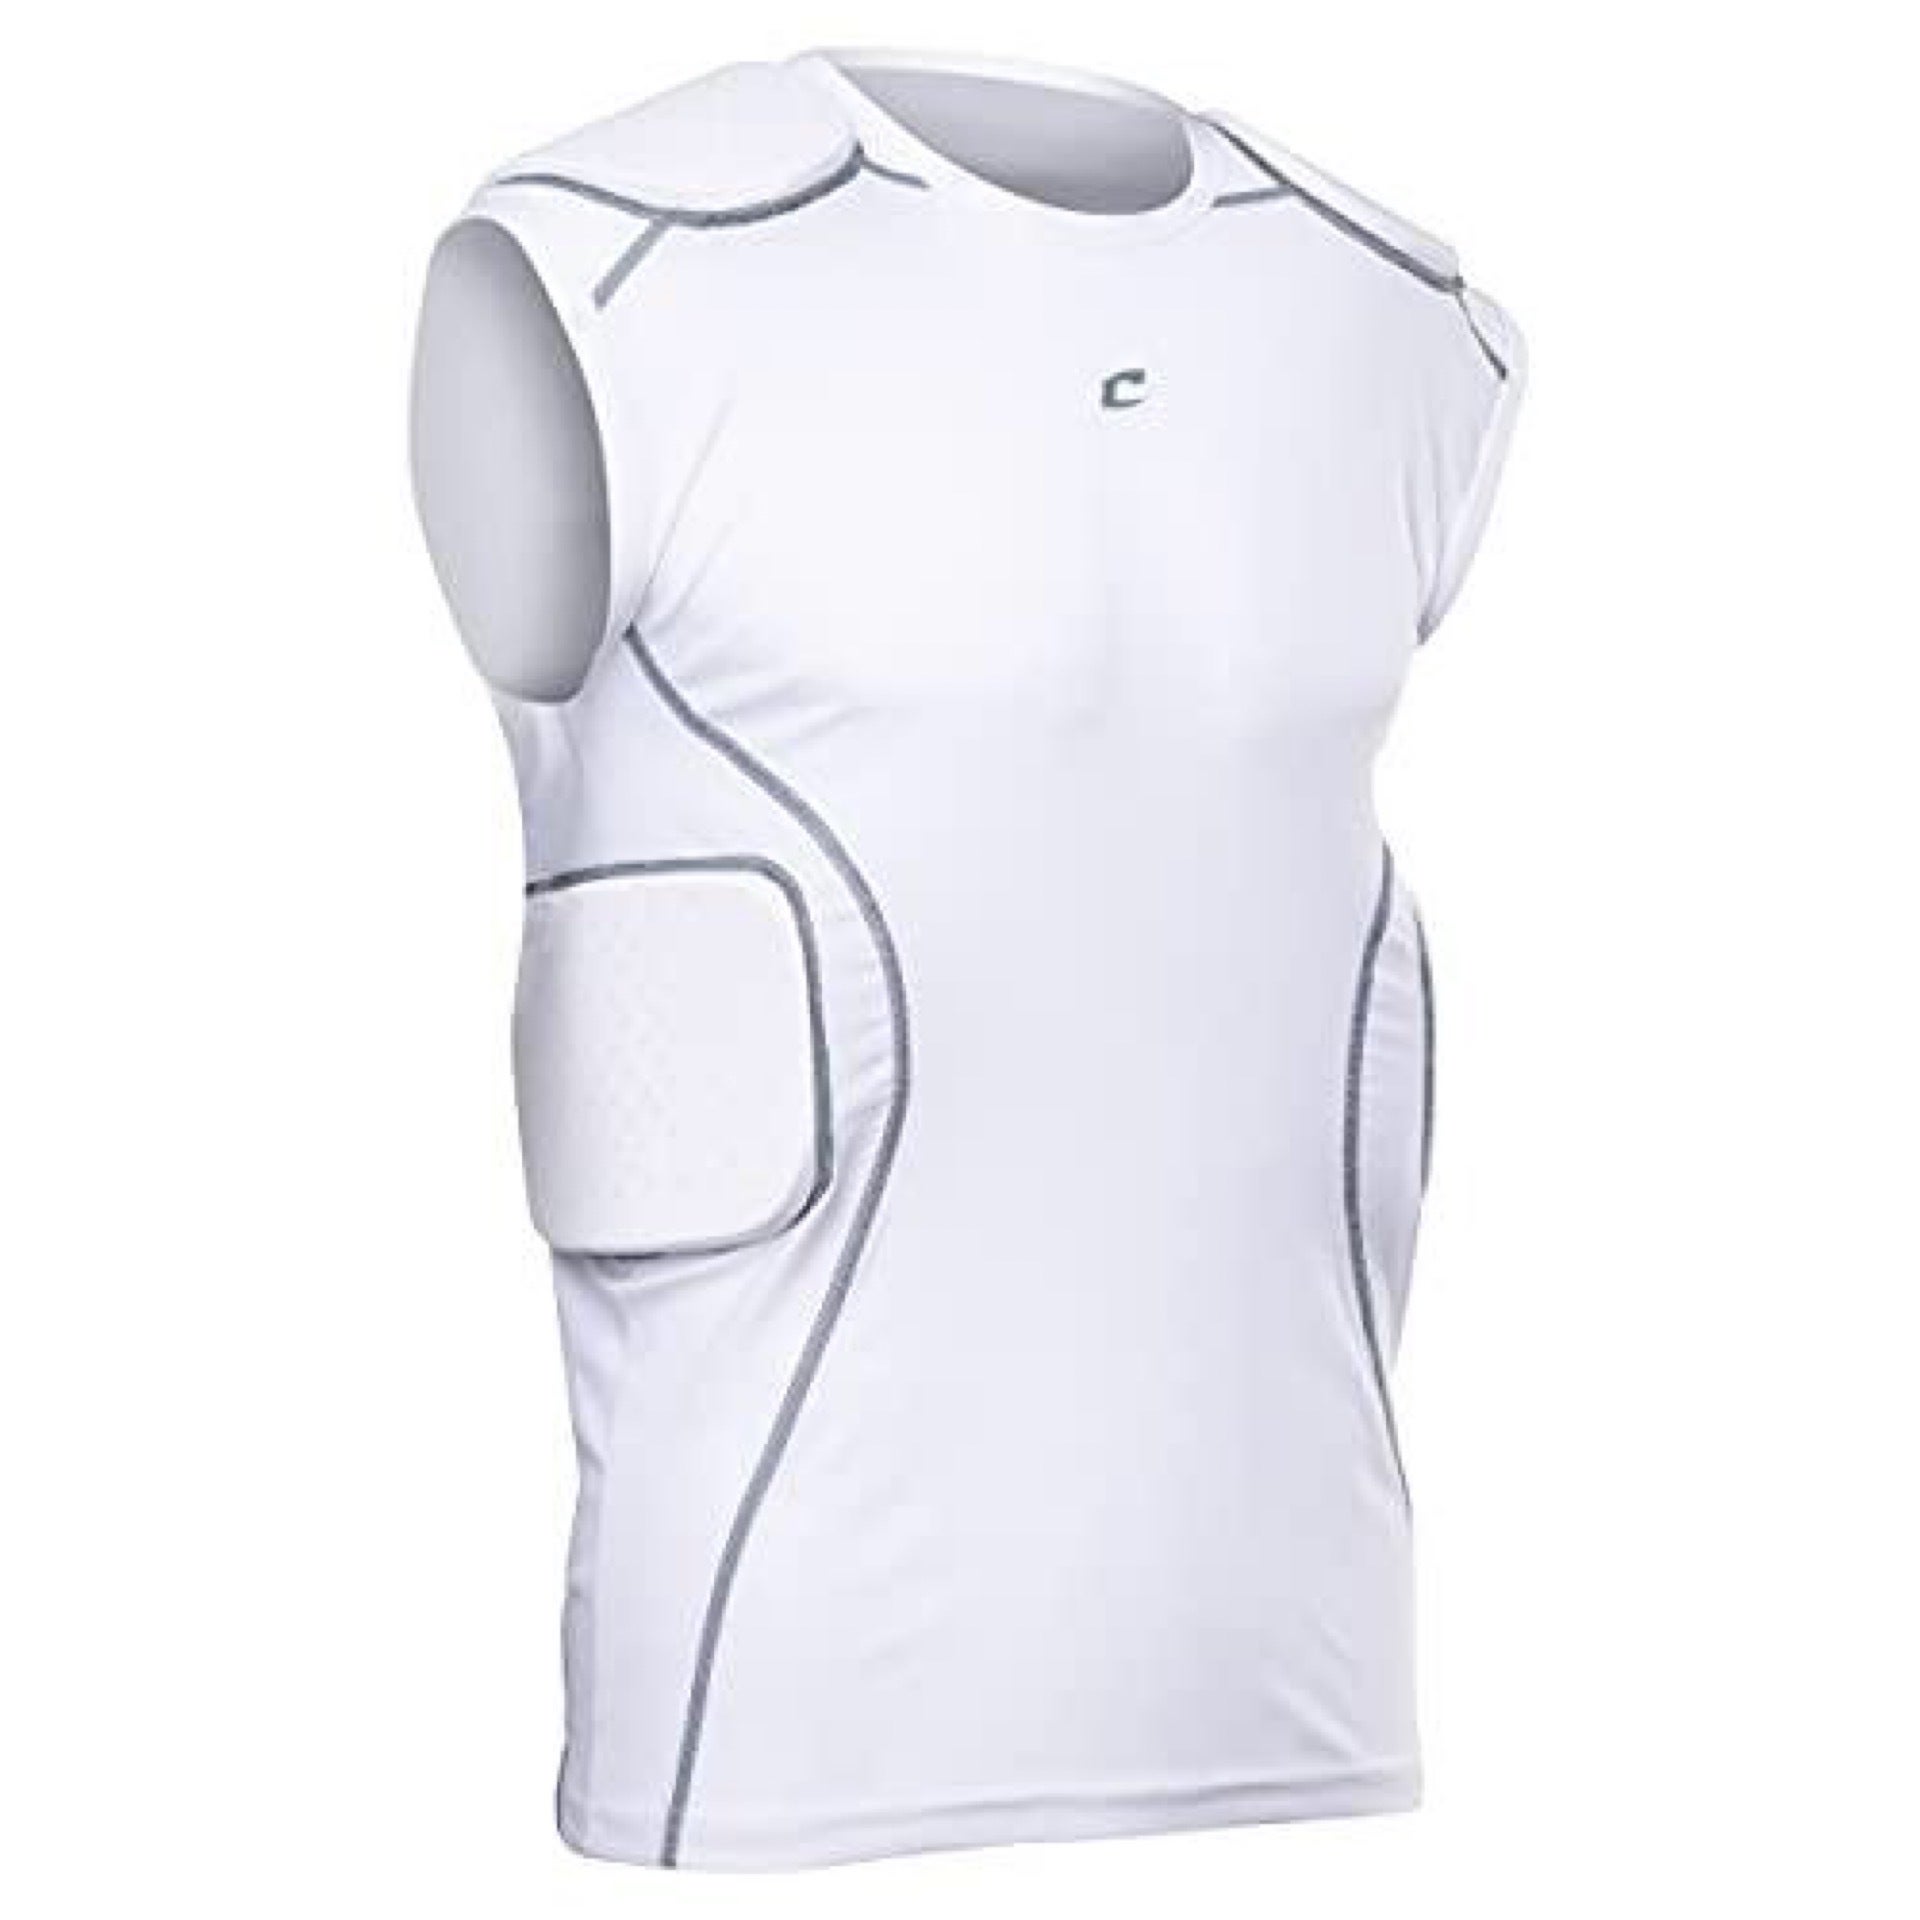 Battle Sports Adult 4-Pad Integrated Compression Top White XL